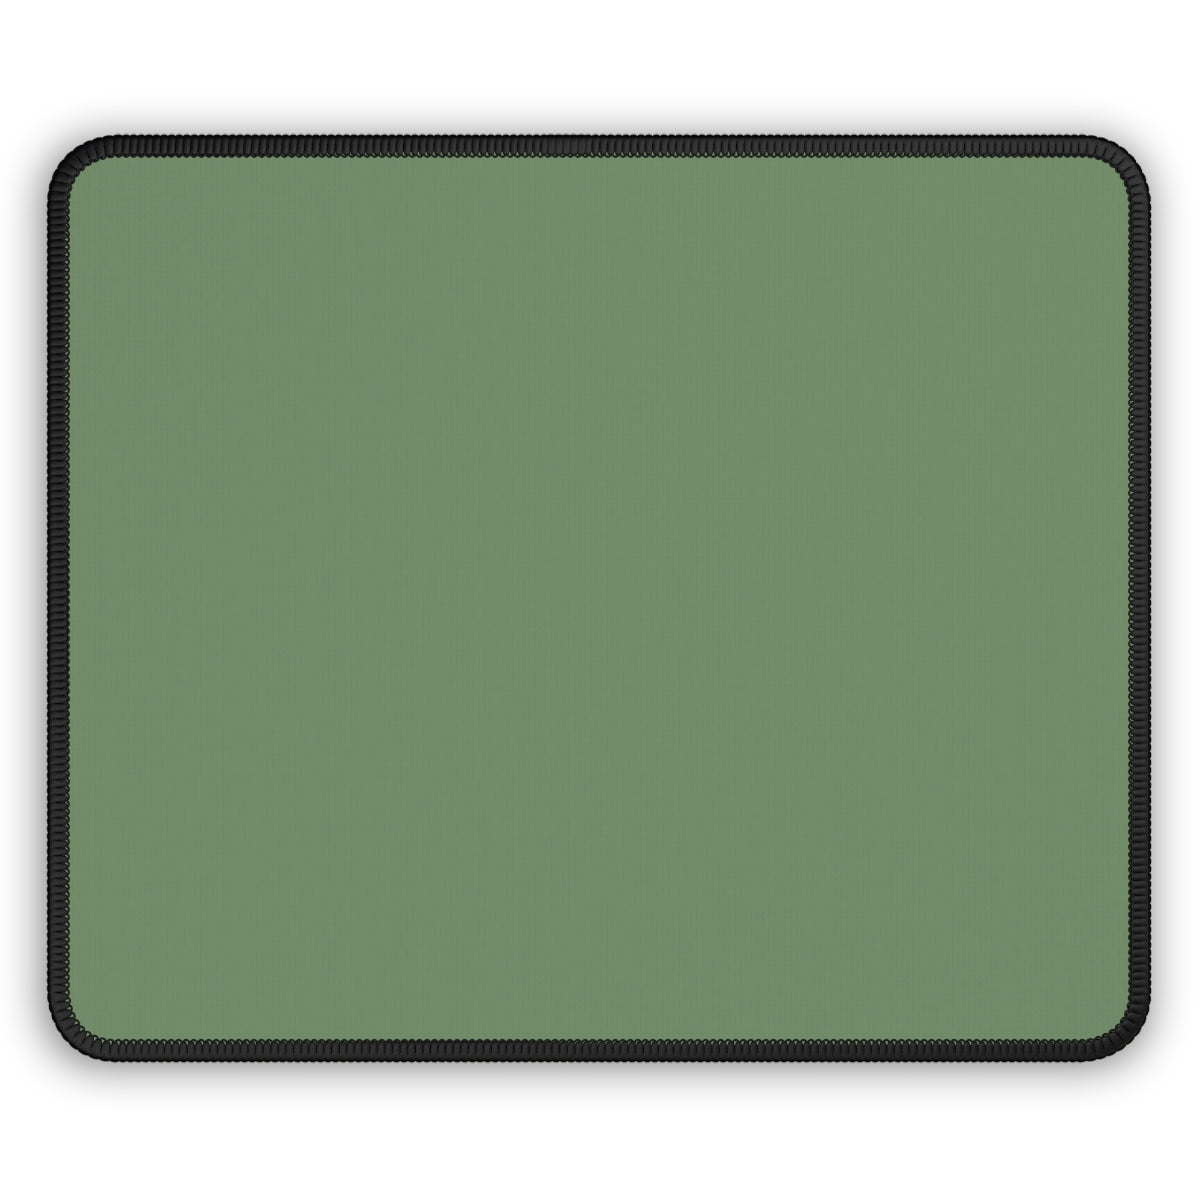 Sage Green Gaming Mouse Pad - Desk Cookies